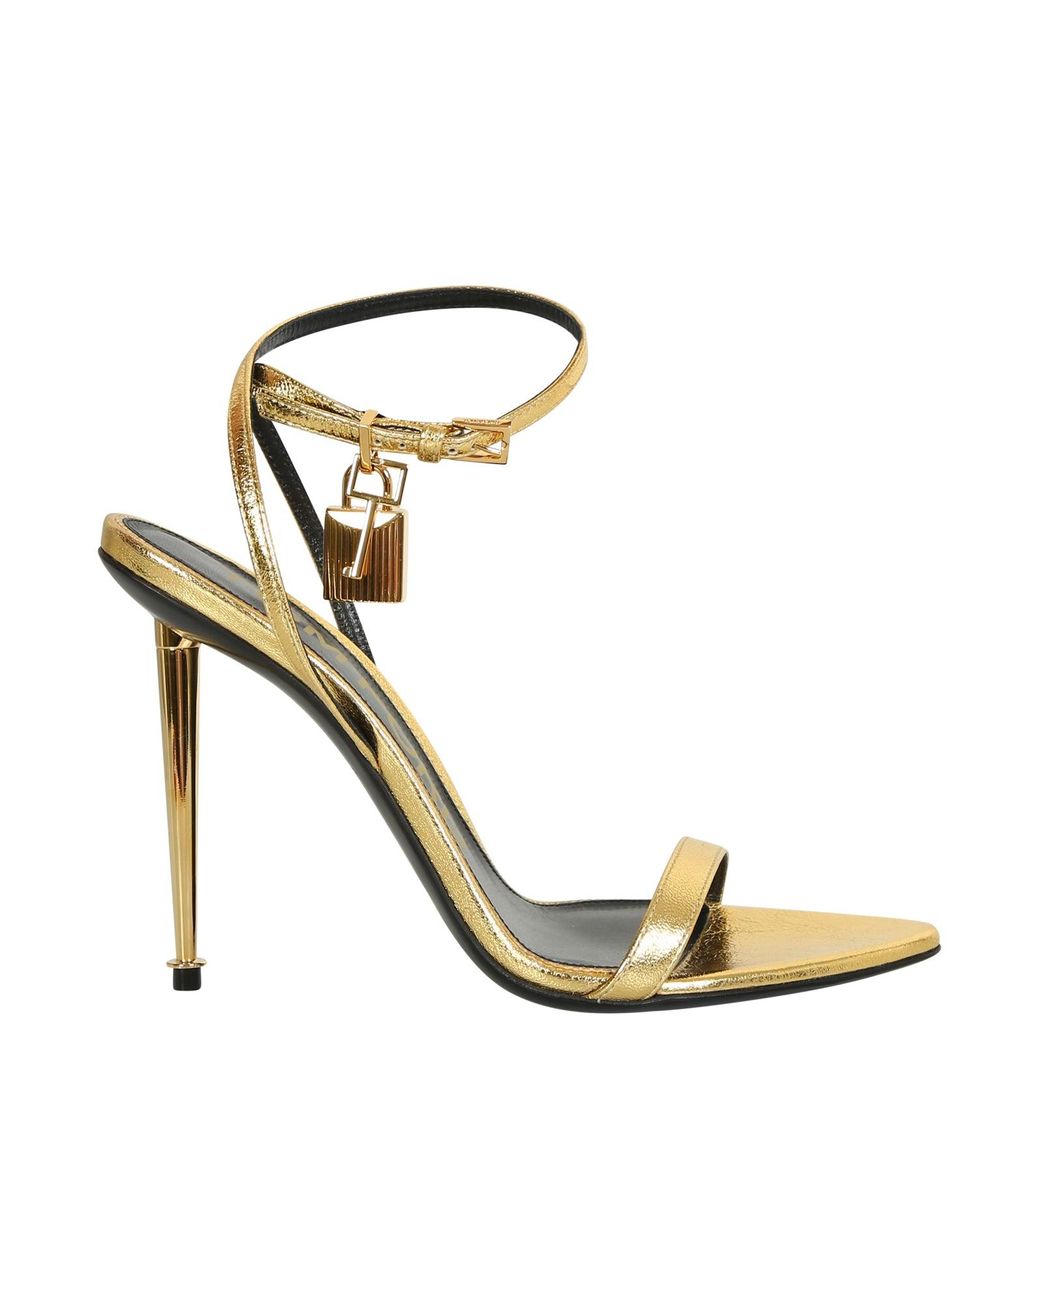 Tom Ford Leather These Gold Heels By Add A Touch Of Glamor To Your ...